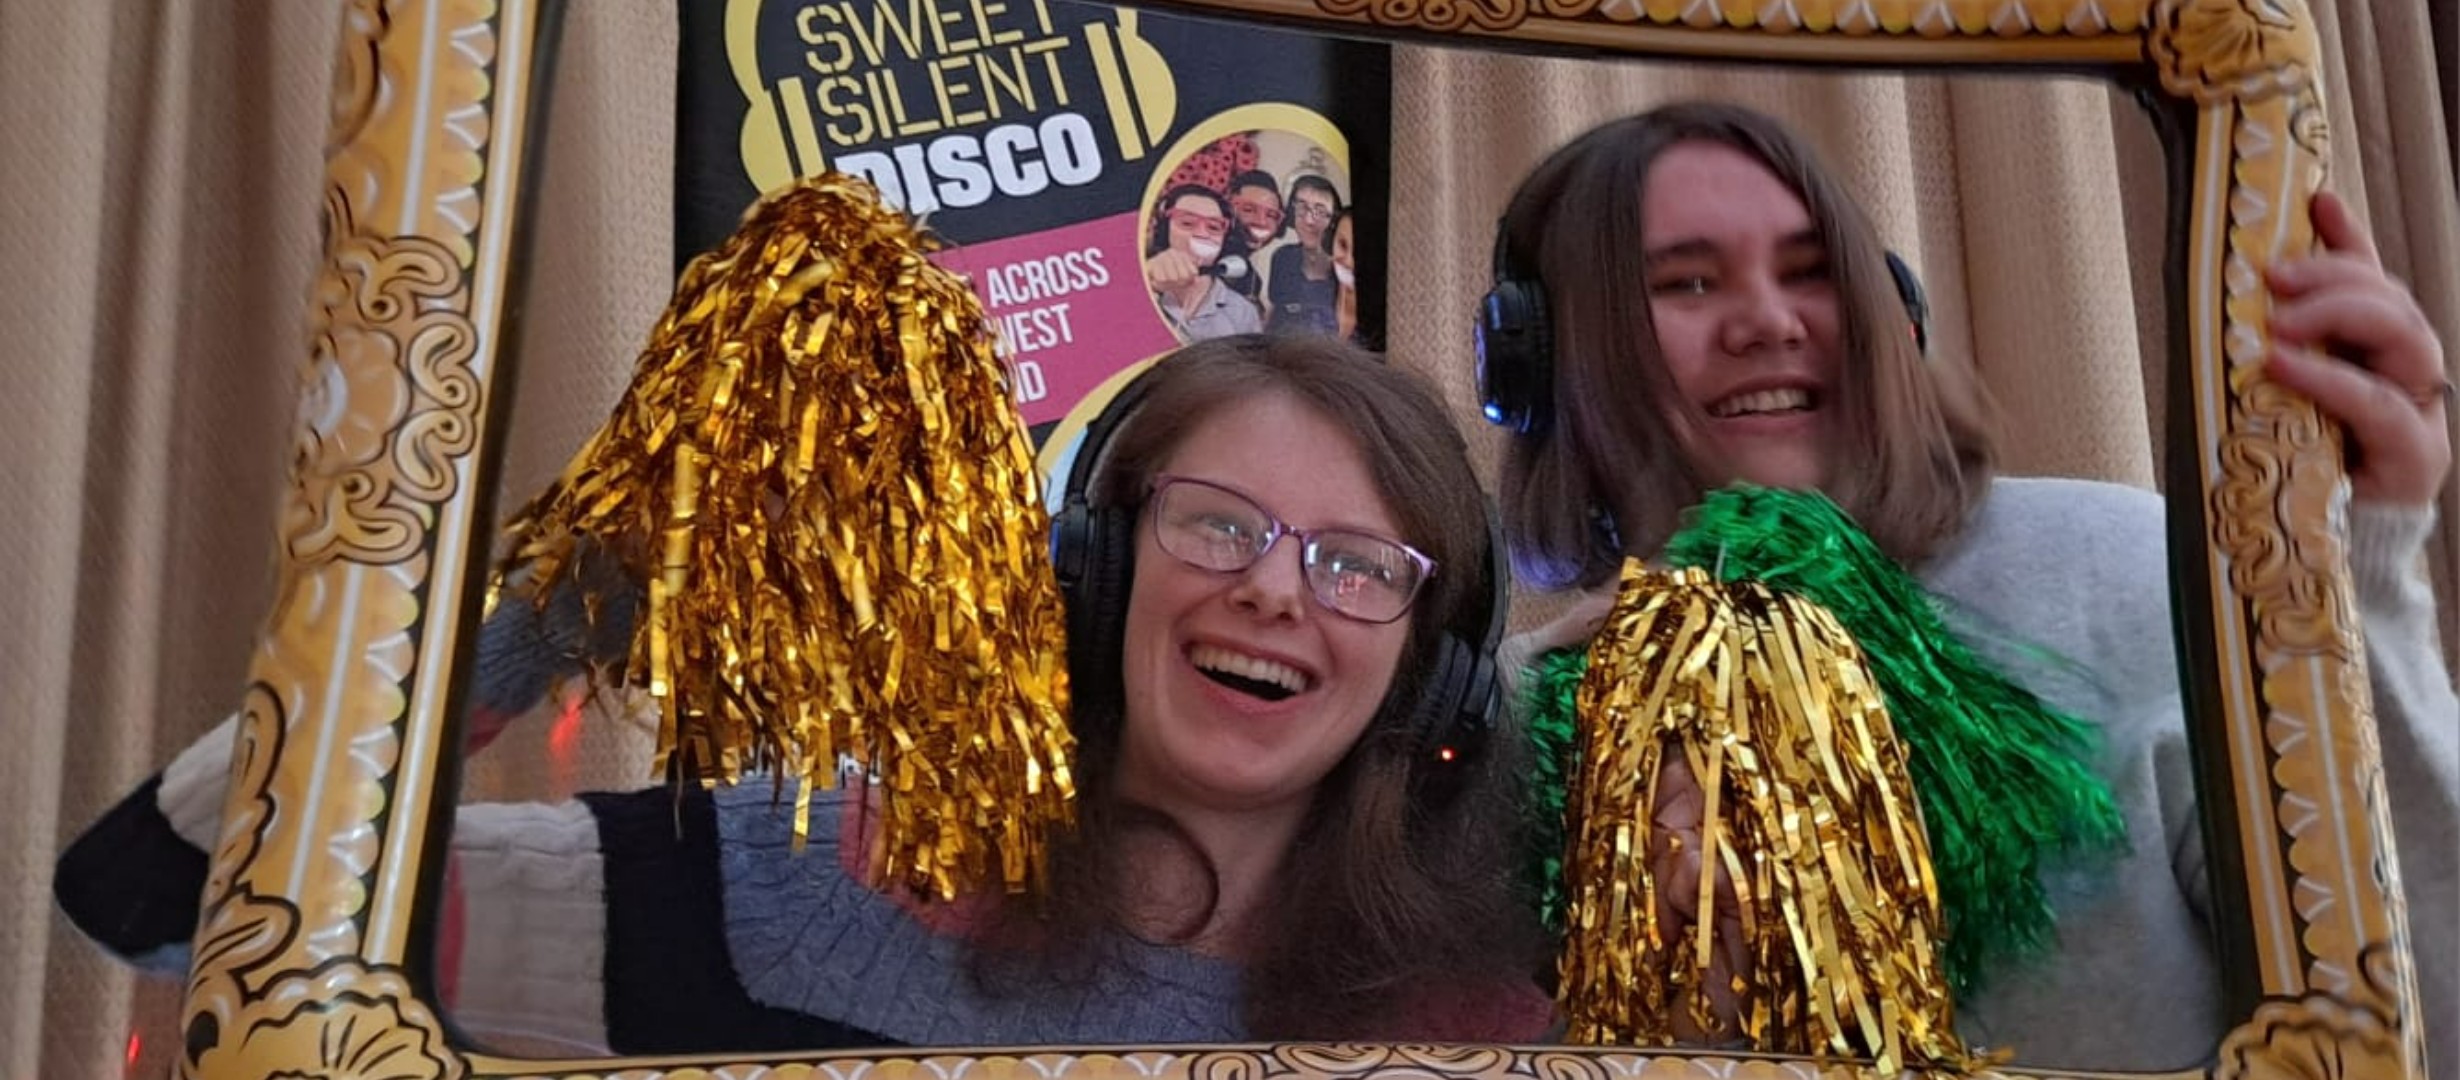 Friends at a charity event listening to a silent disco